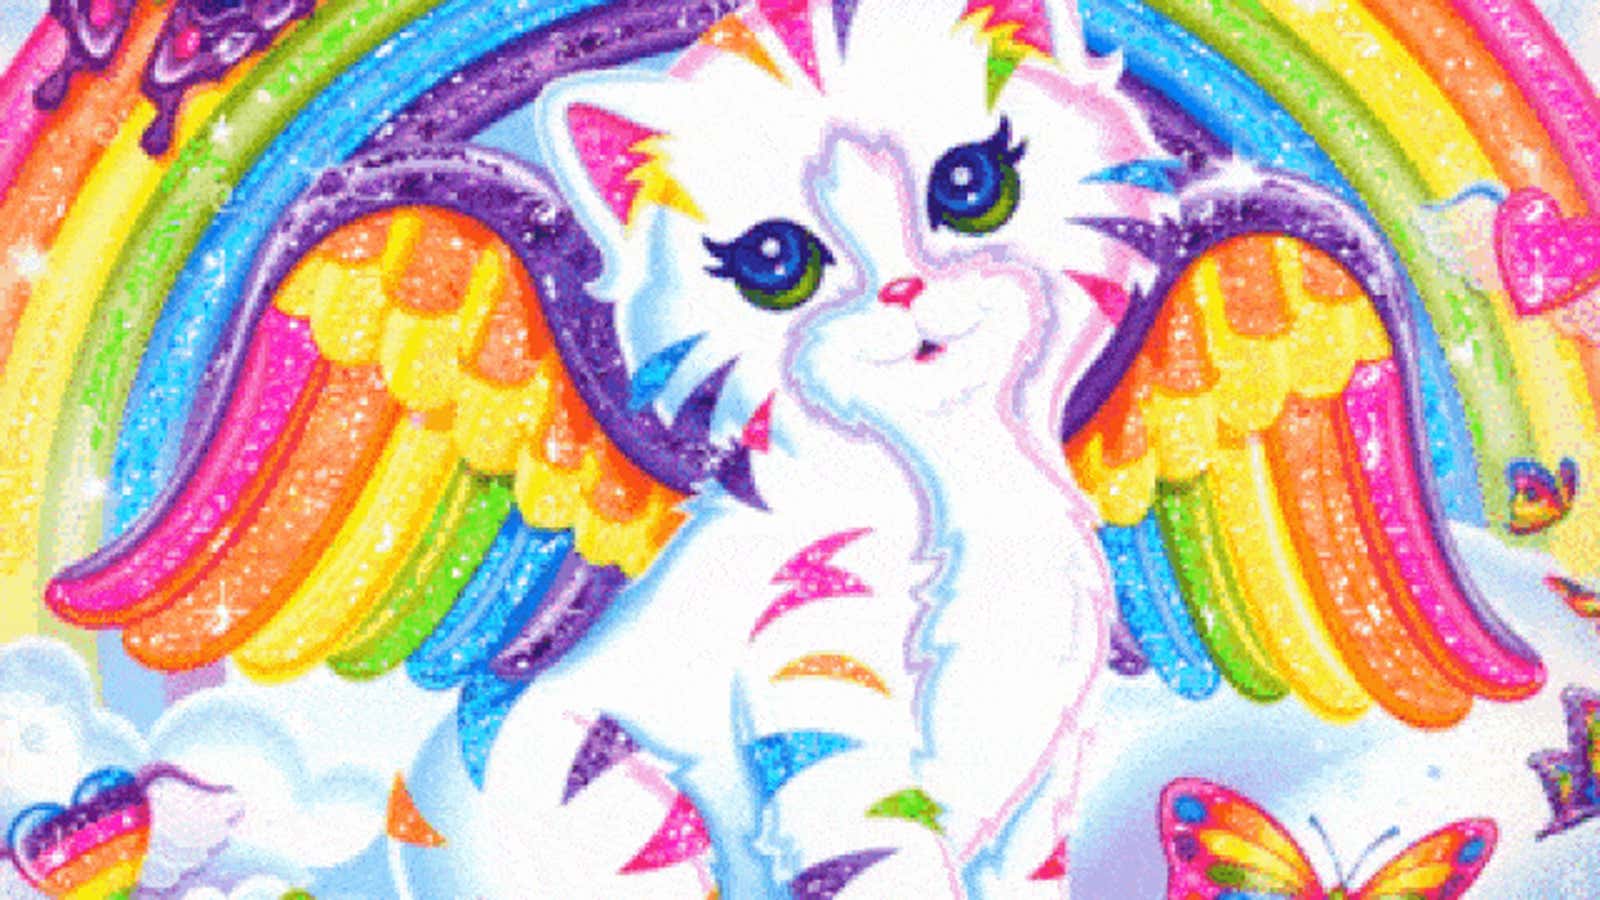 ORLY x Lisa Frank Brings Back Good Memories from the 90s - Musings of a Muse